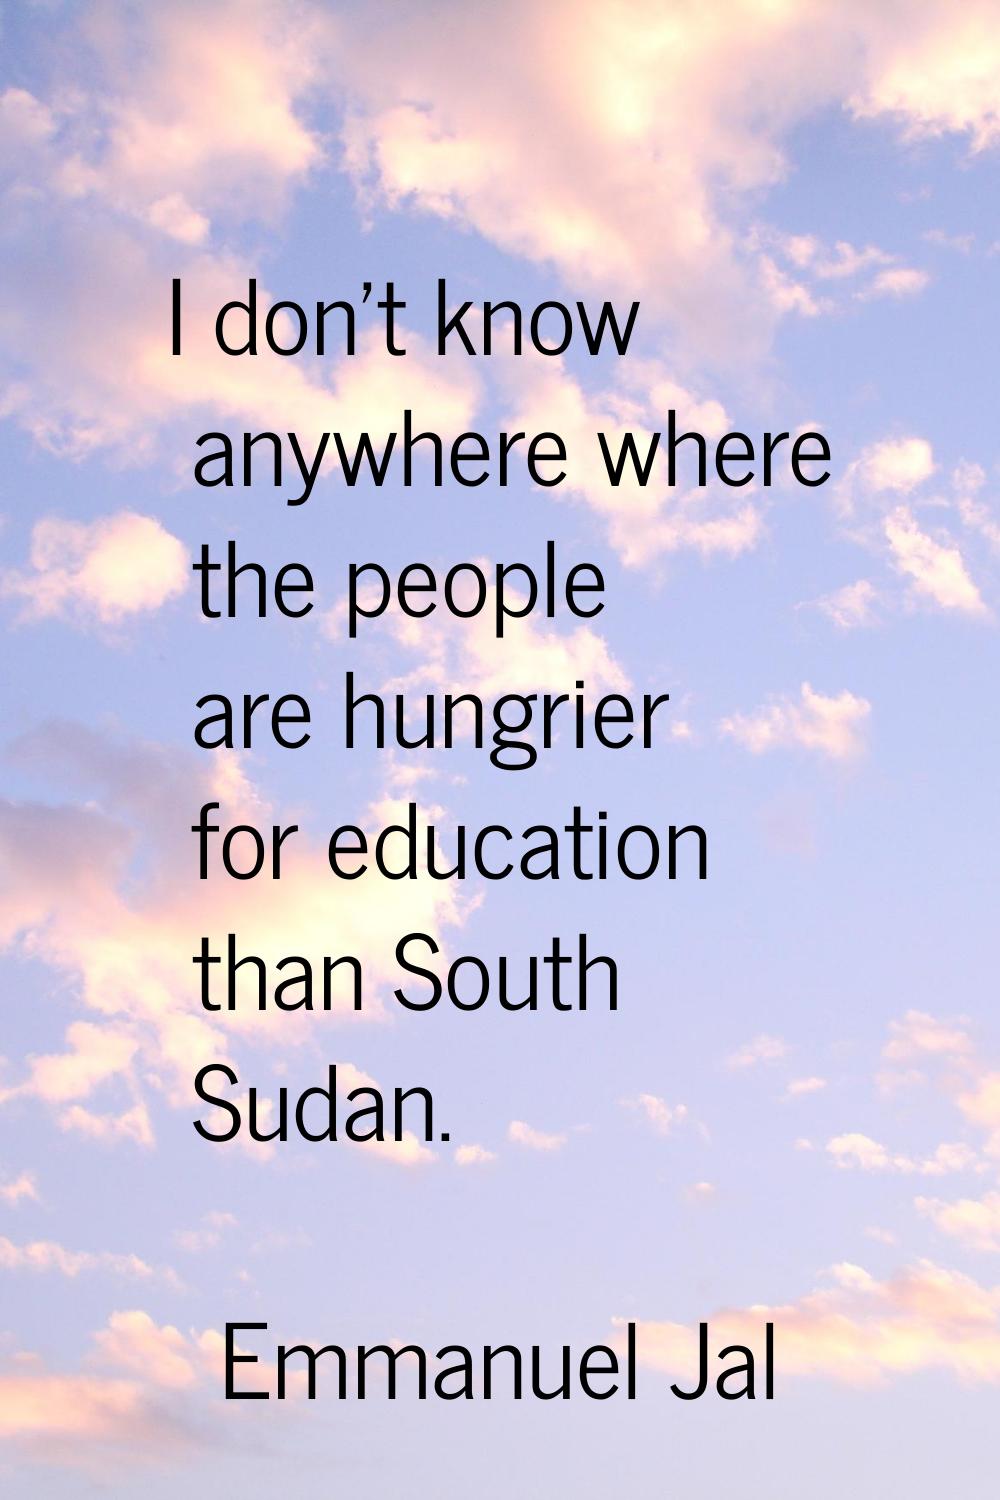 I don't know anywhere where the people are hungrier for education than South Sudan.